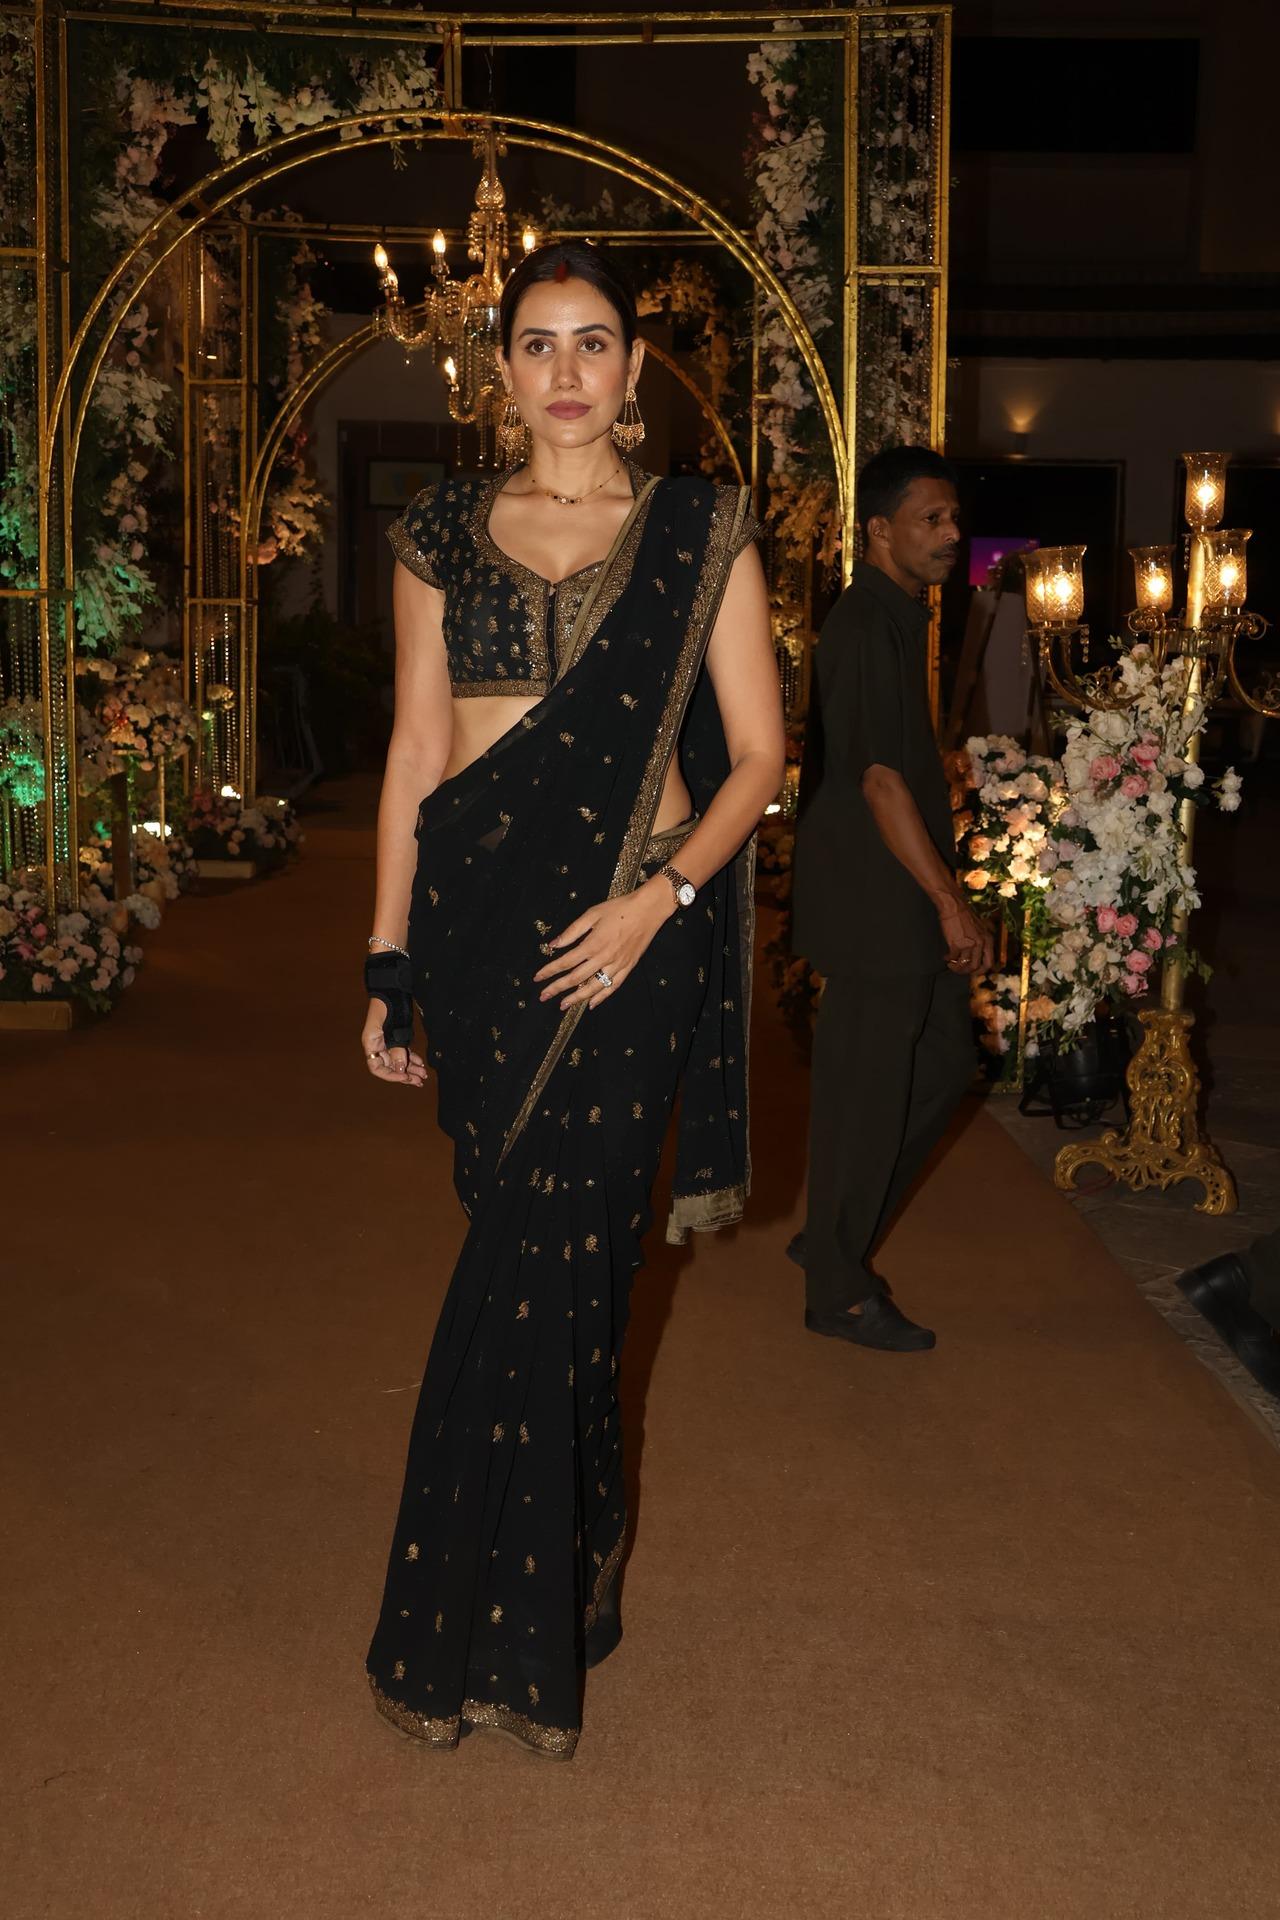 Sonnalli Seygall also attended the intimate party, wearing a black saree with golden embroidery. She paired the saree with a stylish blouse